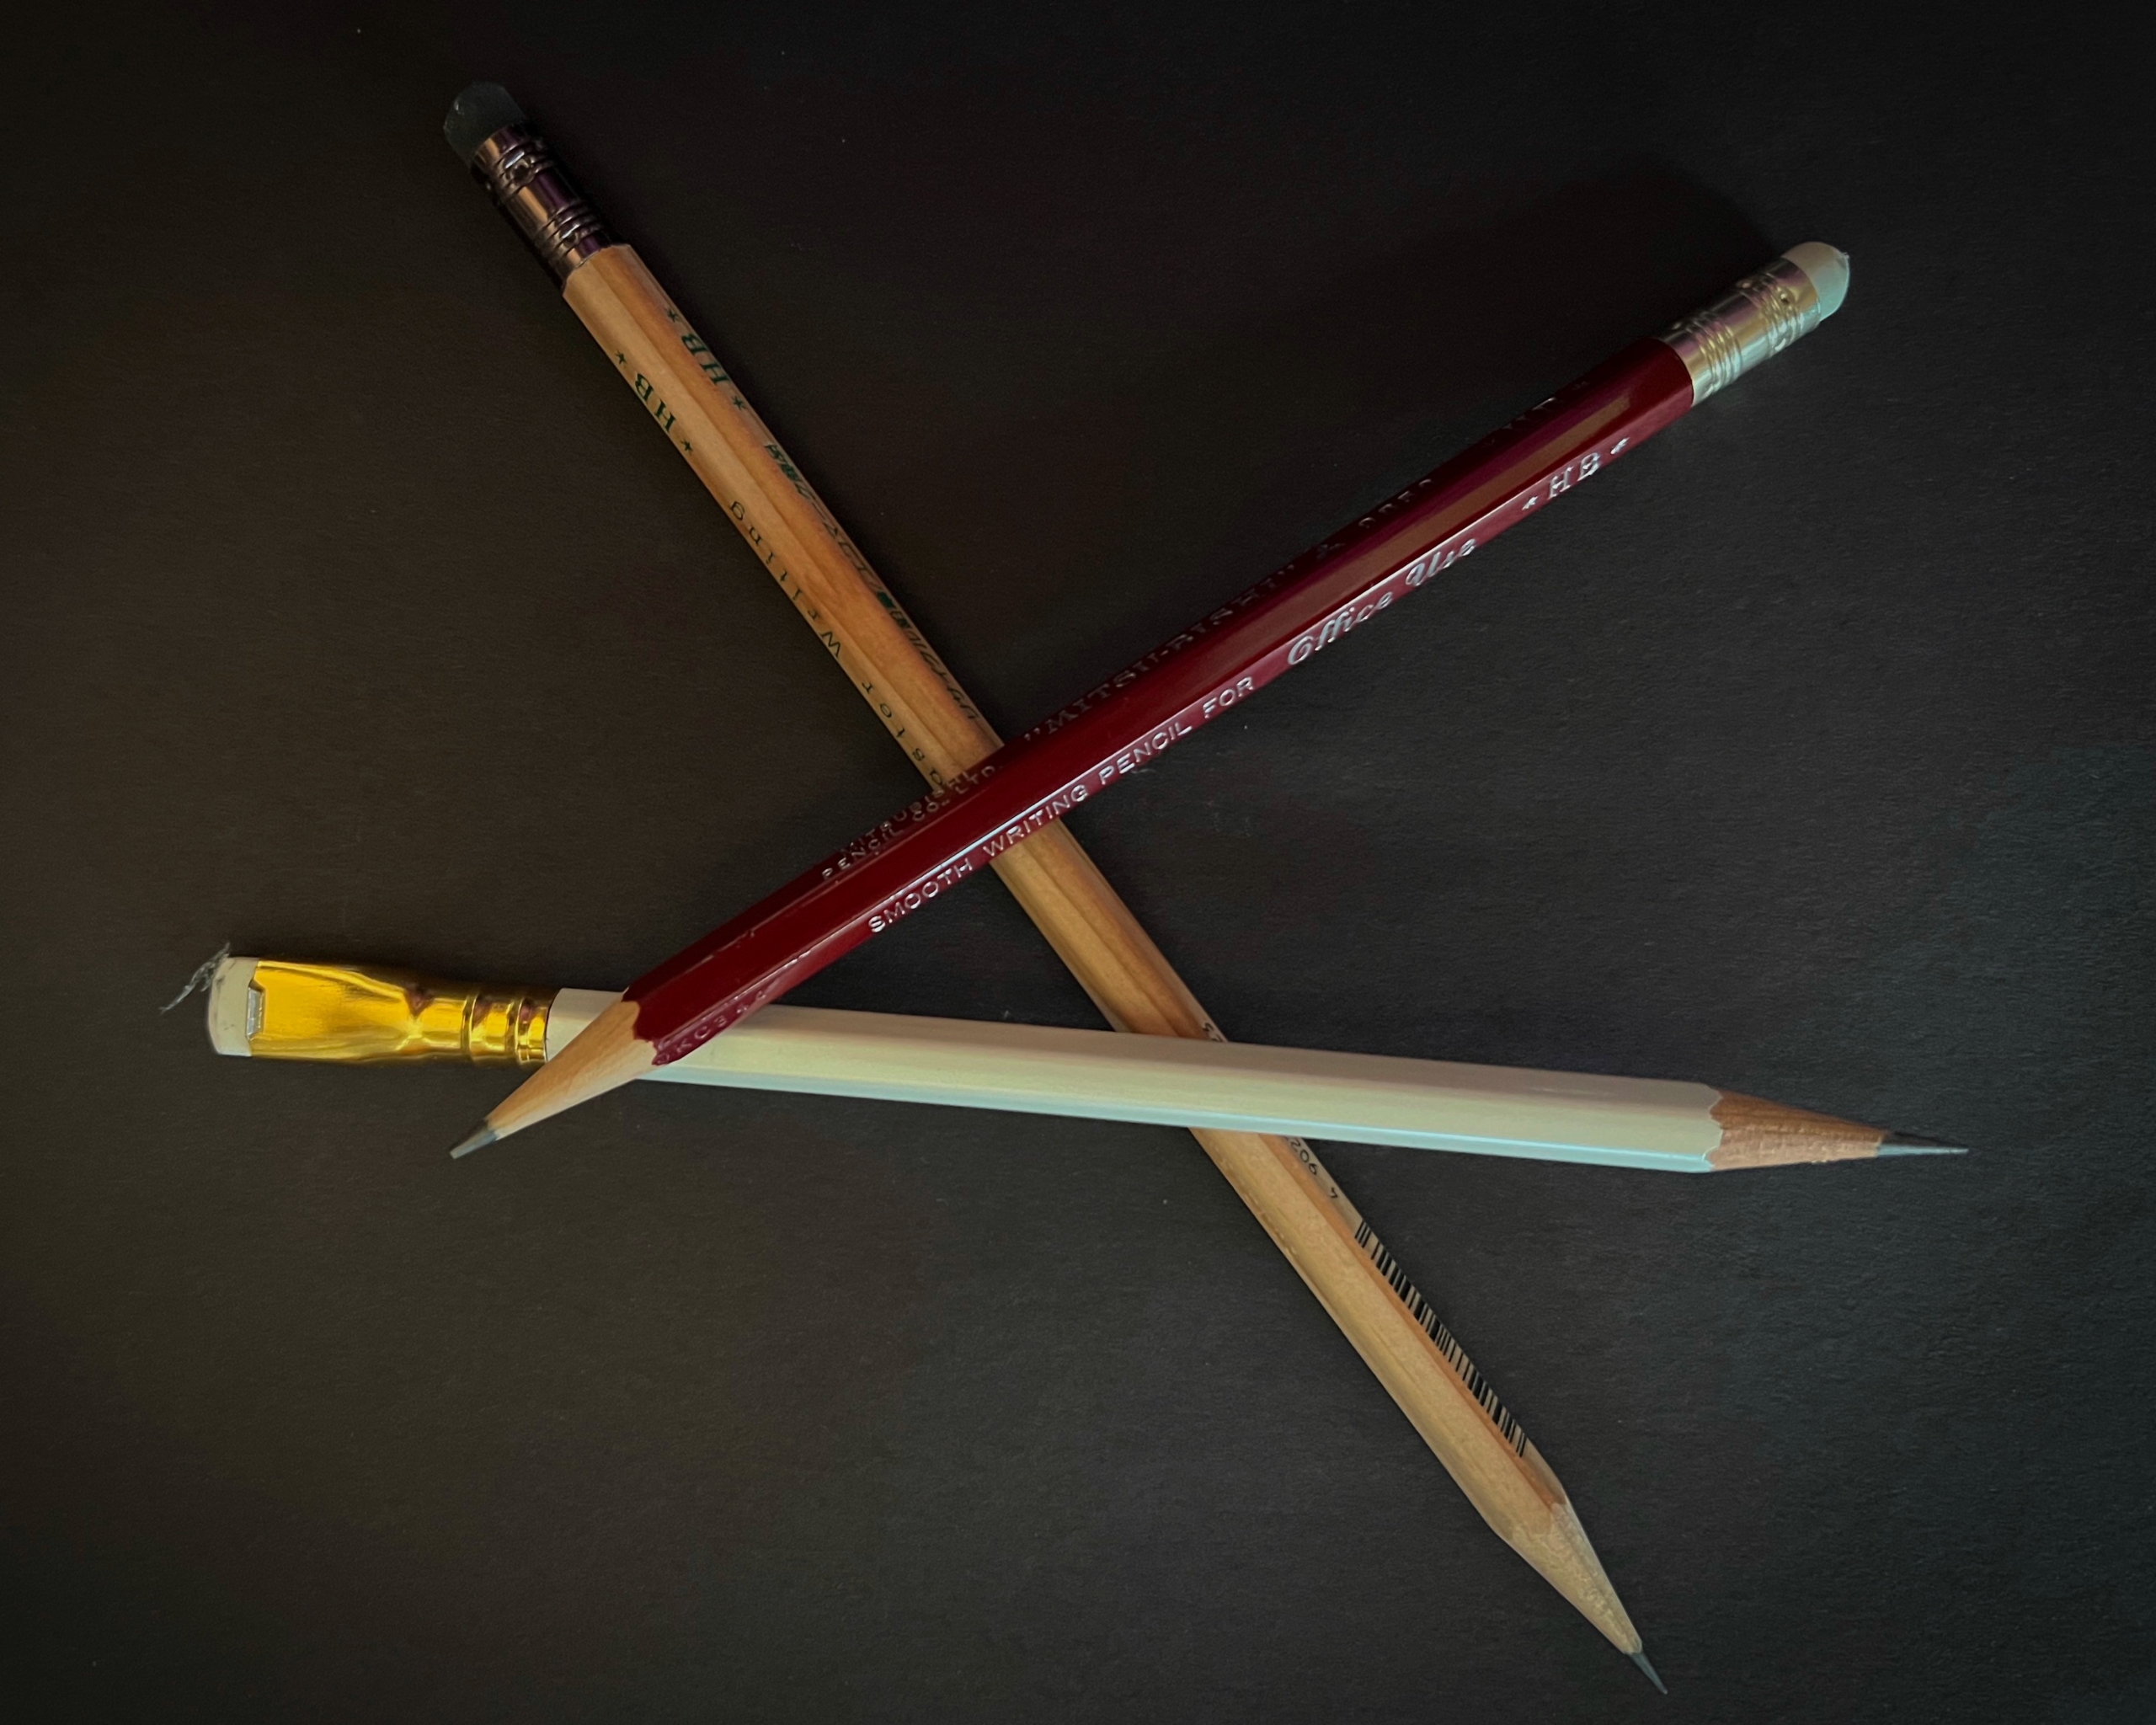 Three used pencils, red, white, and brown, laying at angles to one another on a black background